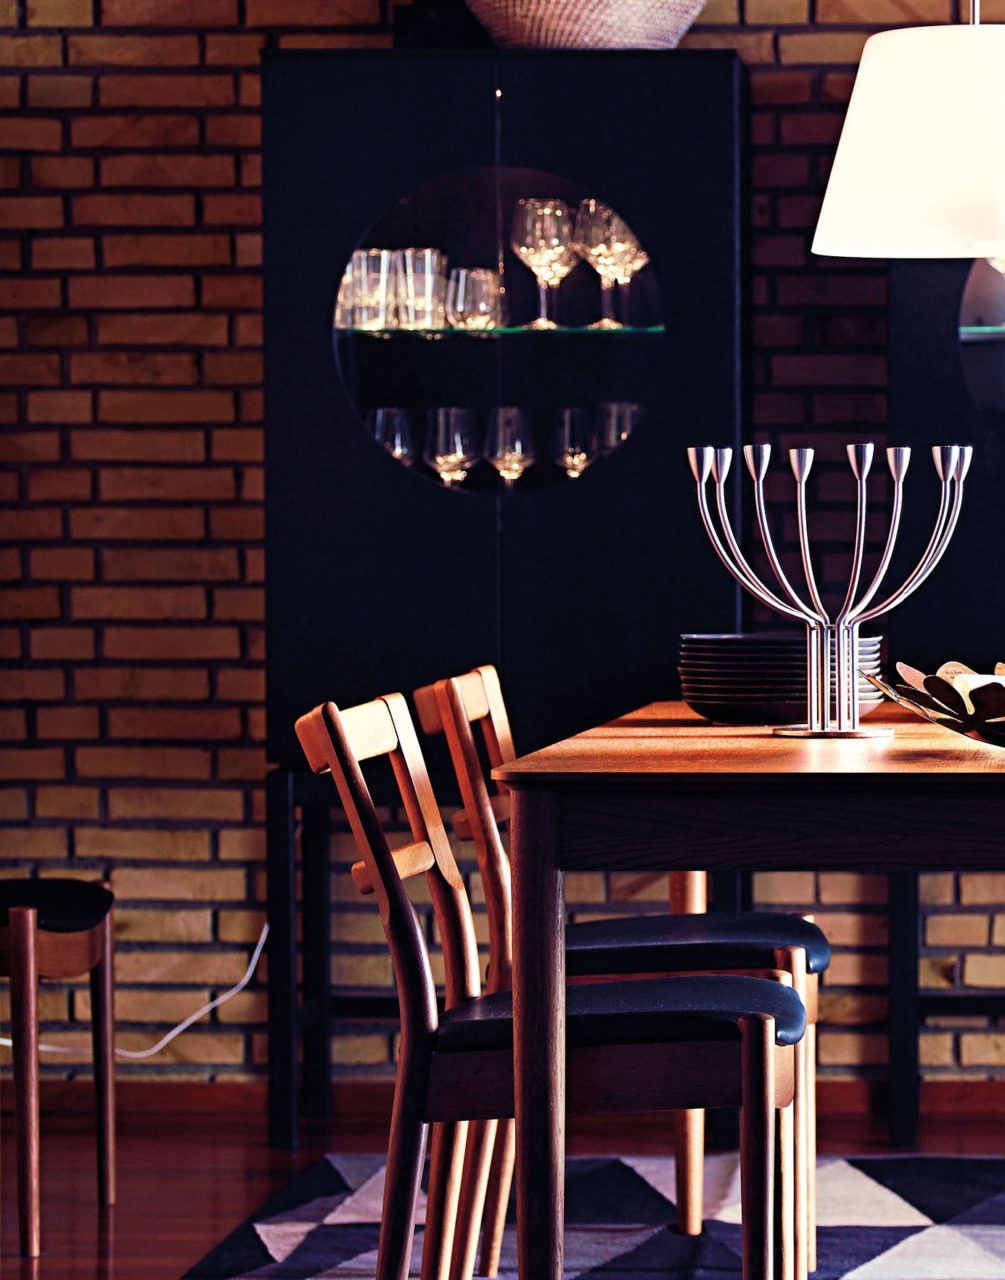 Dining room with brick wall, wooden table and chairs, black display cabinet with wine glasses behind round windows.